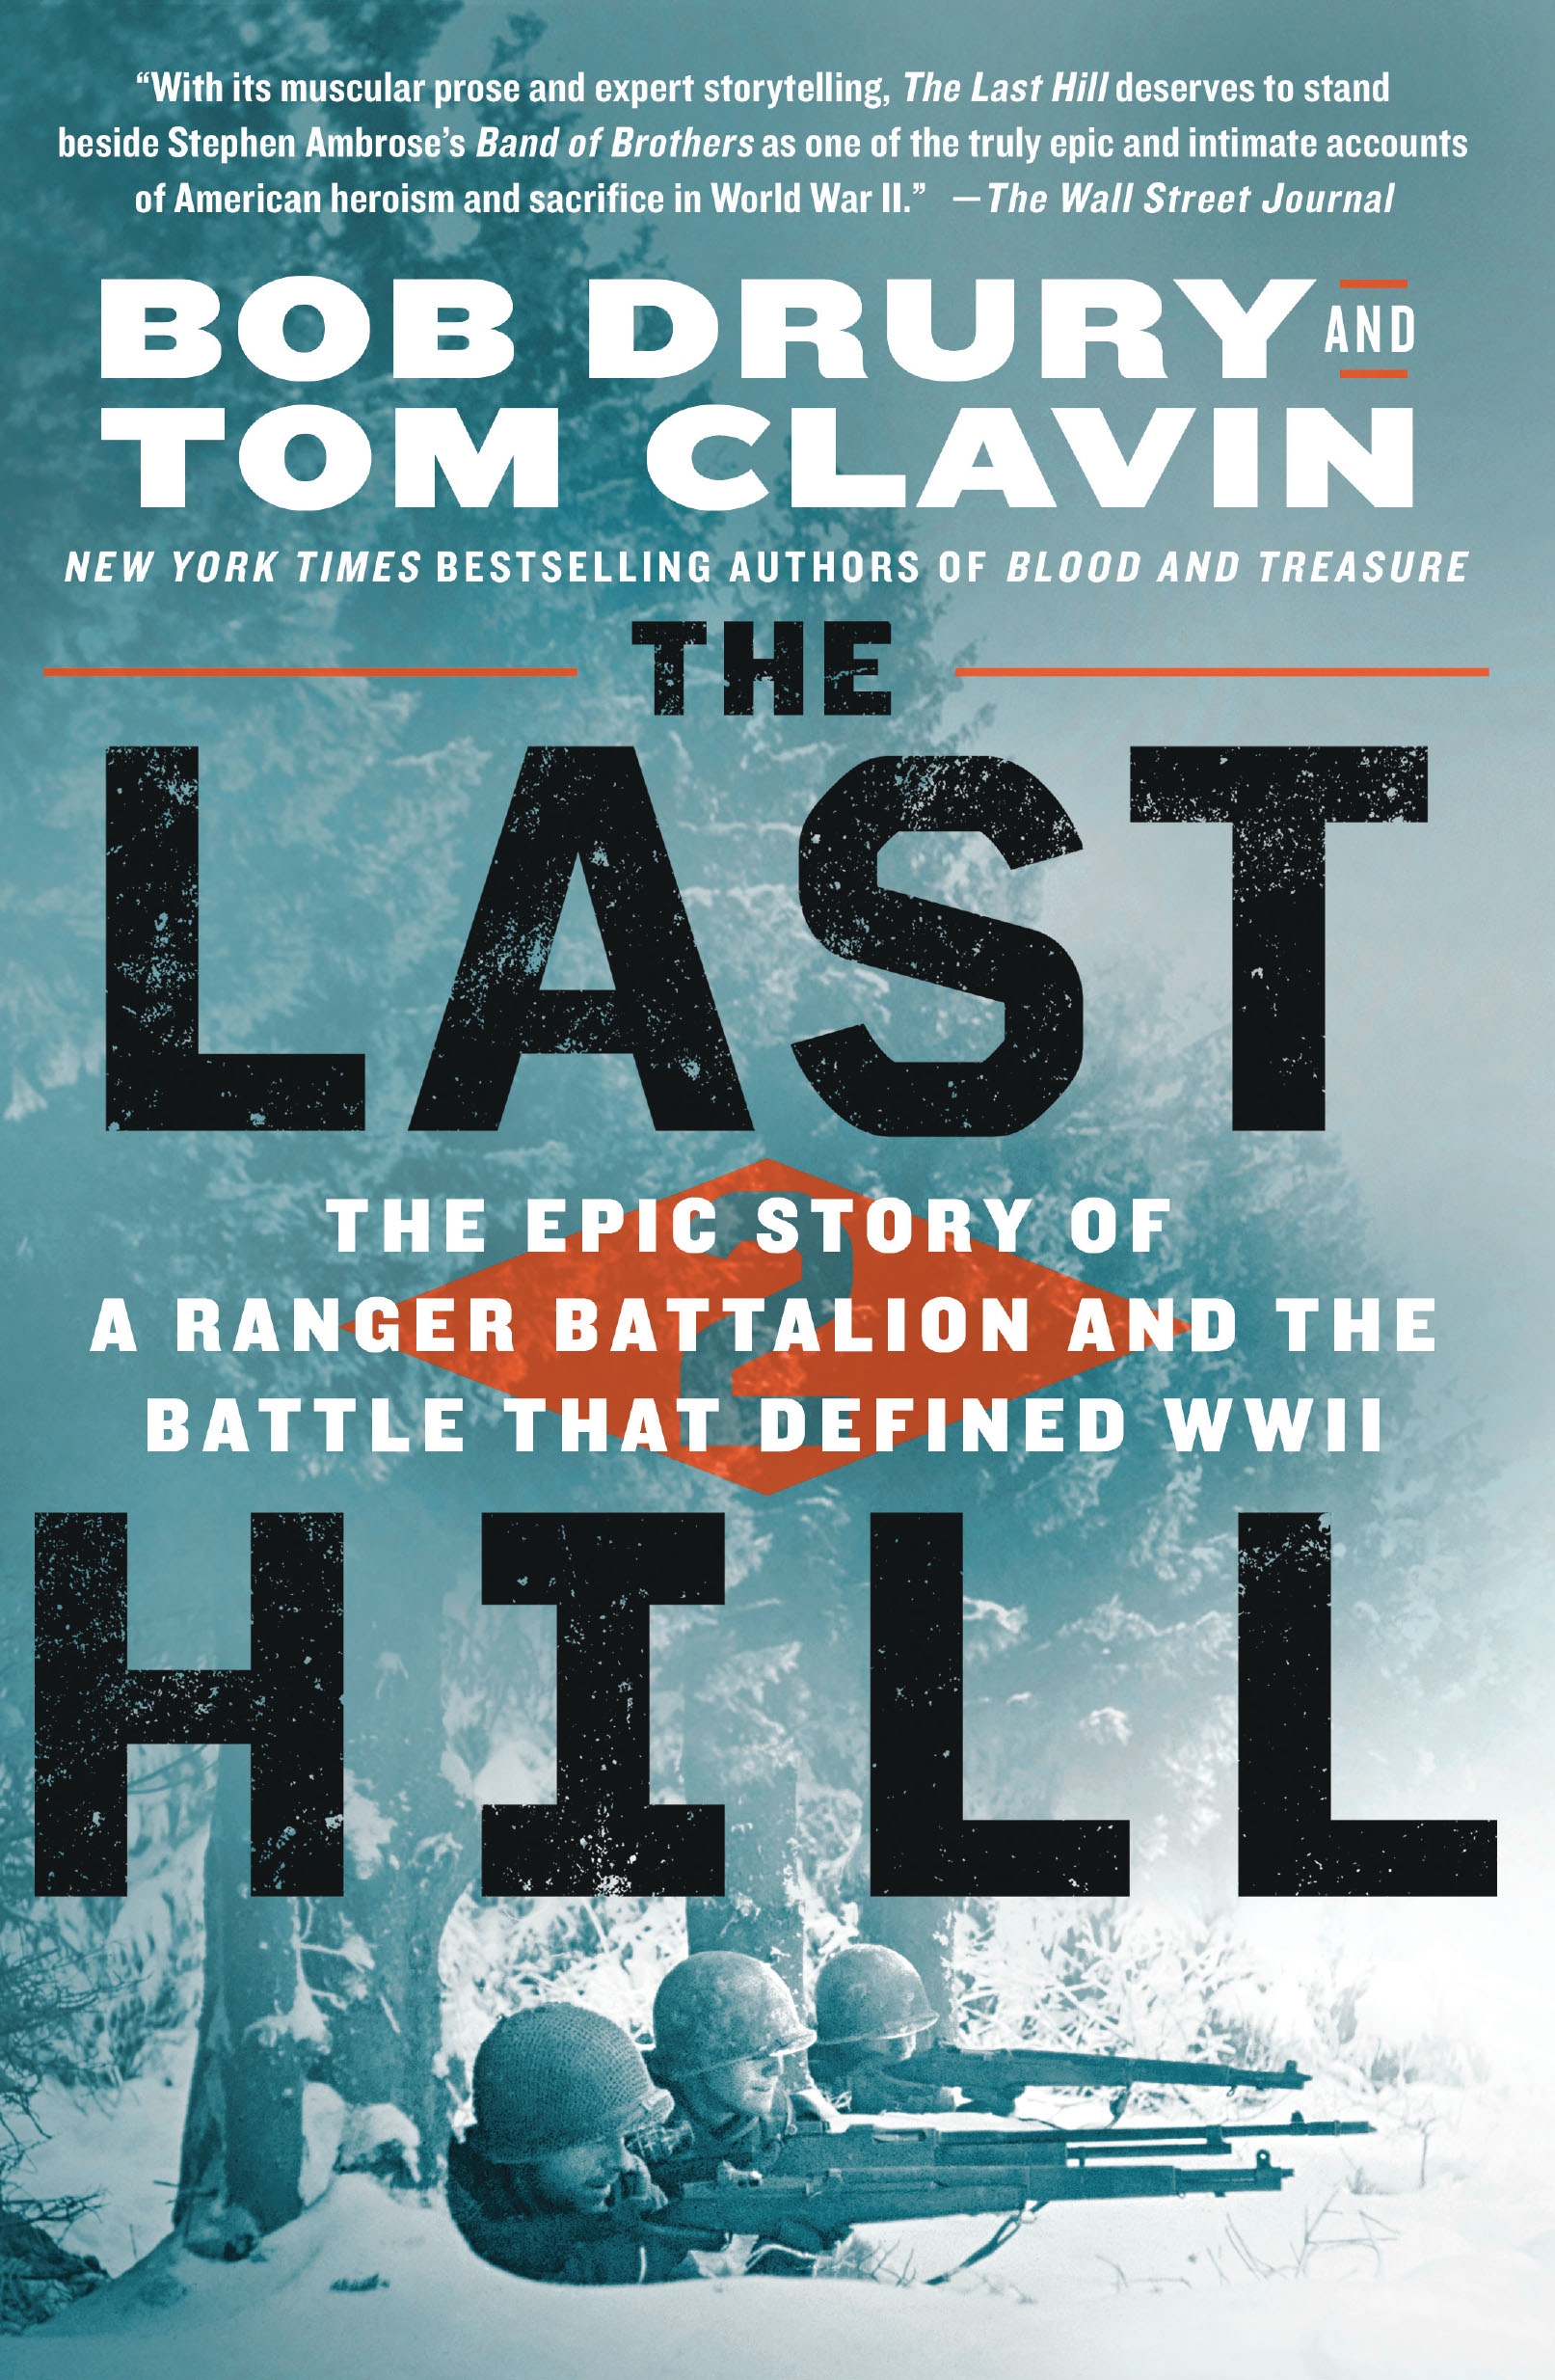 The Last Hill The Epic Story of a Ranger Battalion and the Battle That Defined WWII